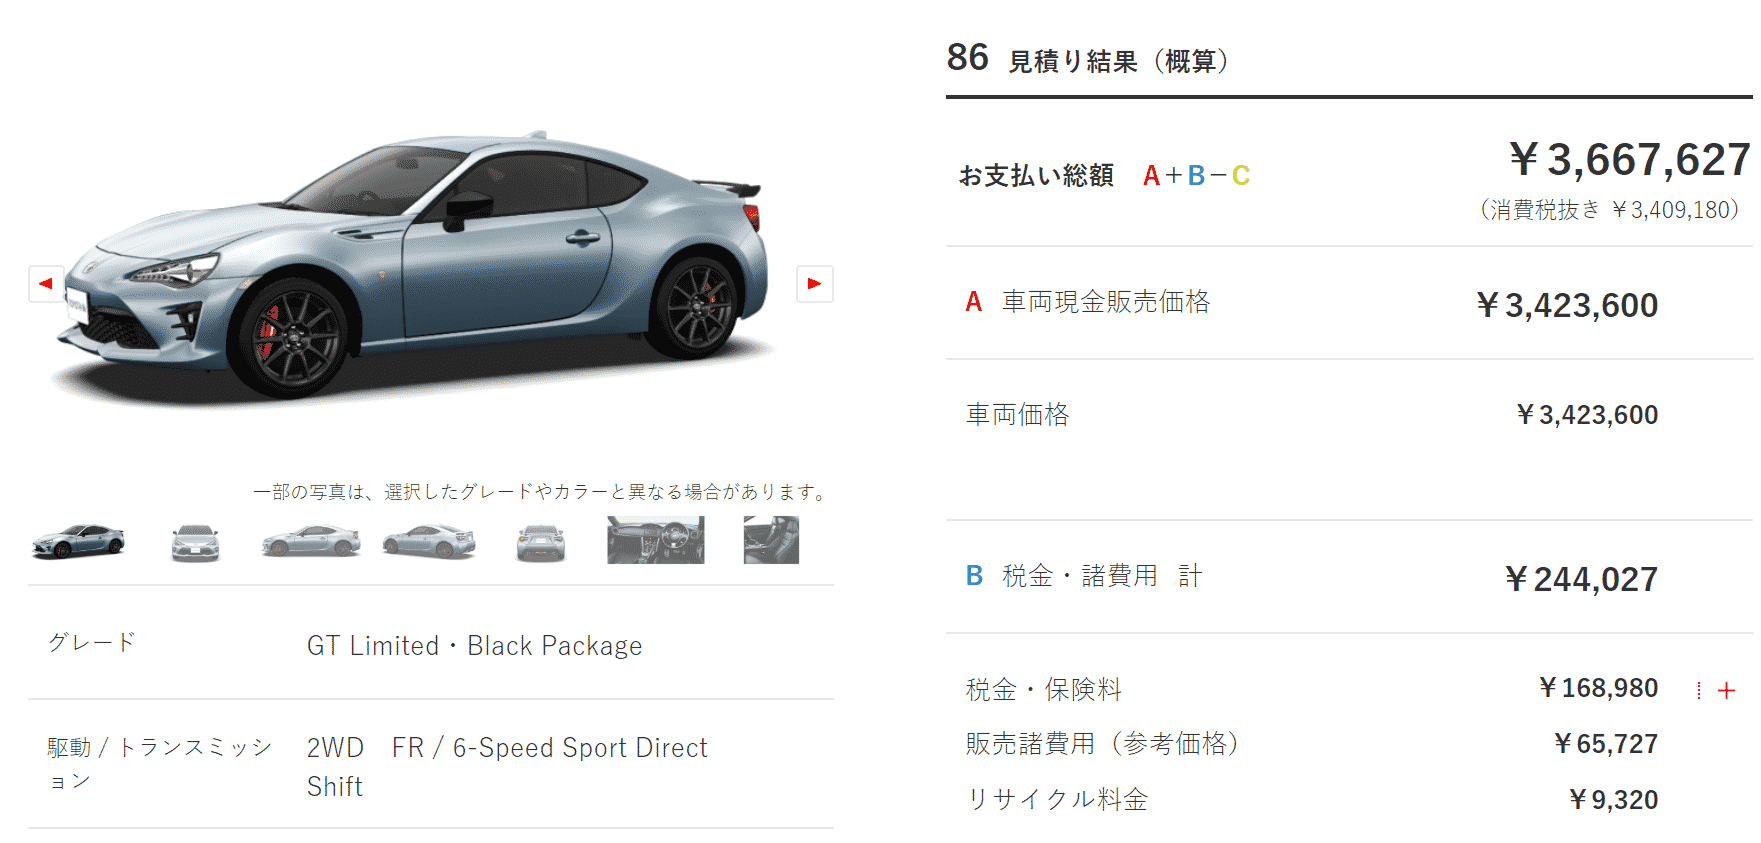 「GT“Limited・Black Package”」の支払い総額目処の画像